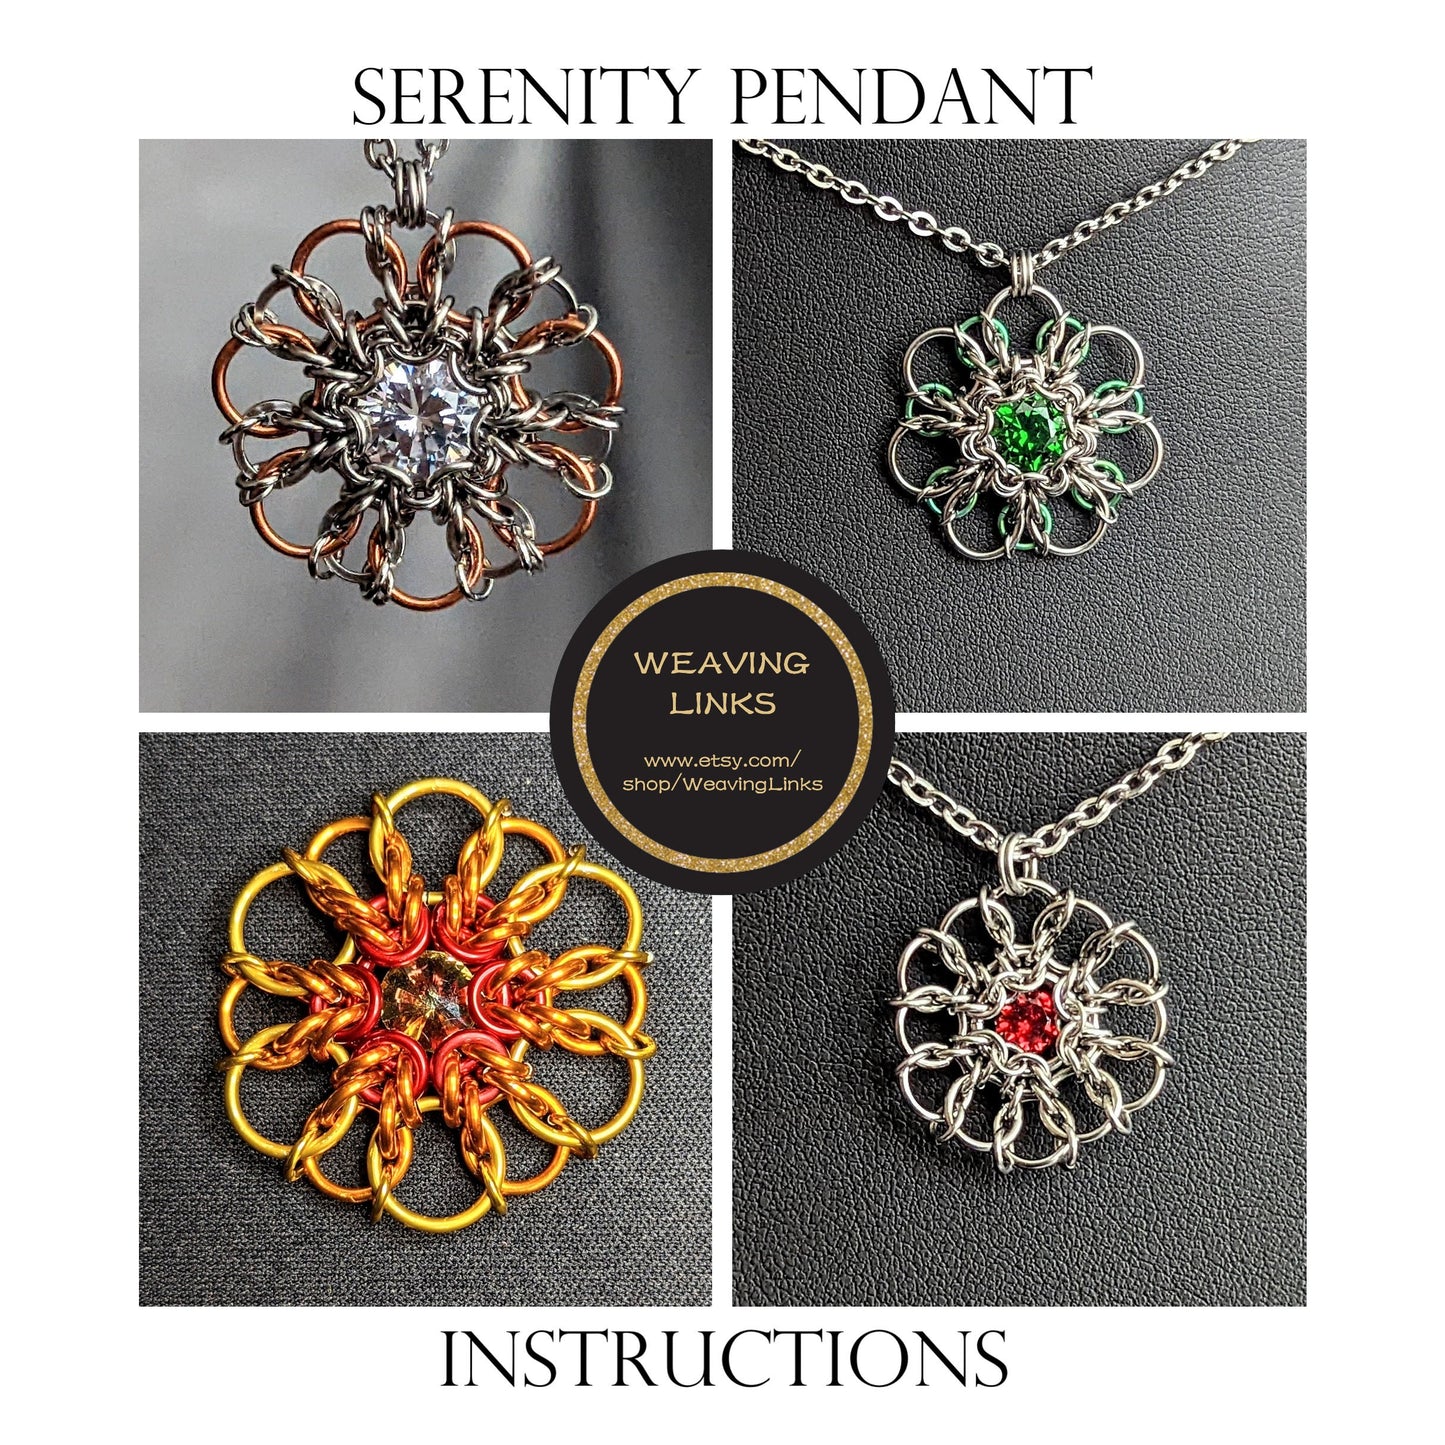 Instructions for Serenity Pendant